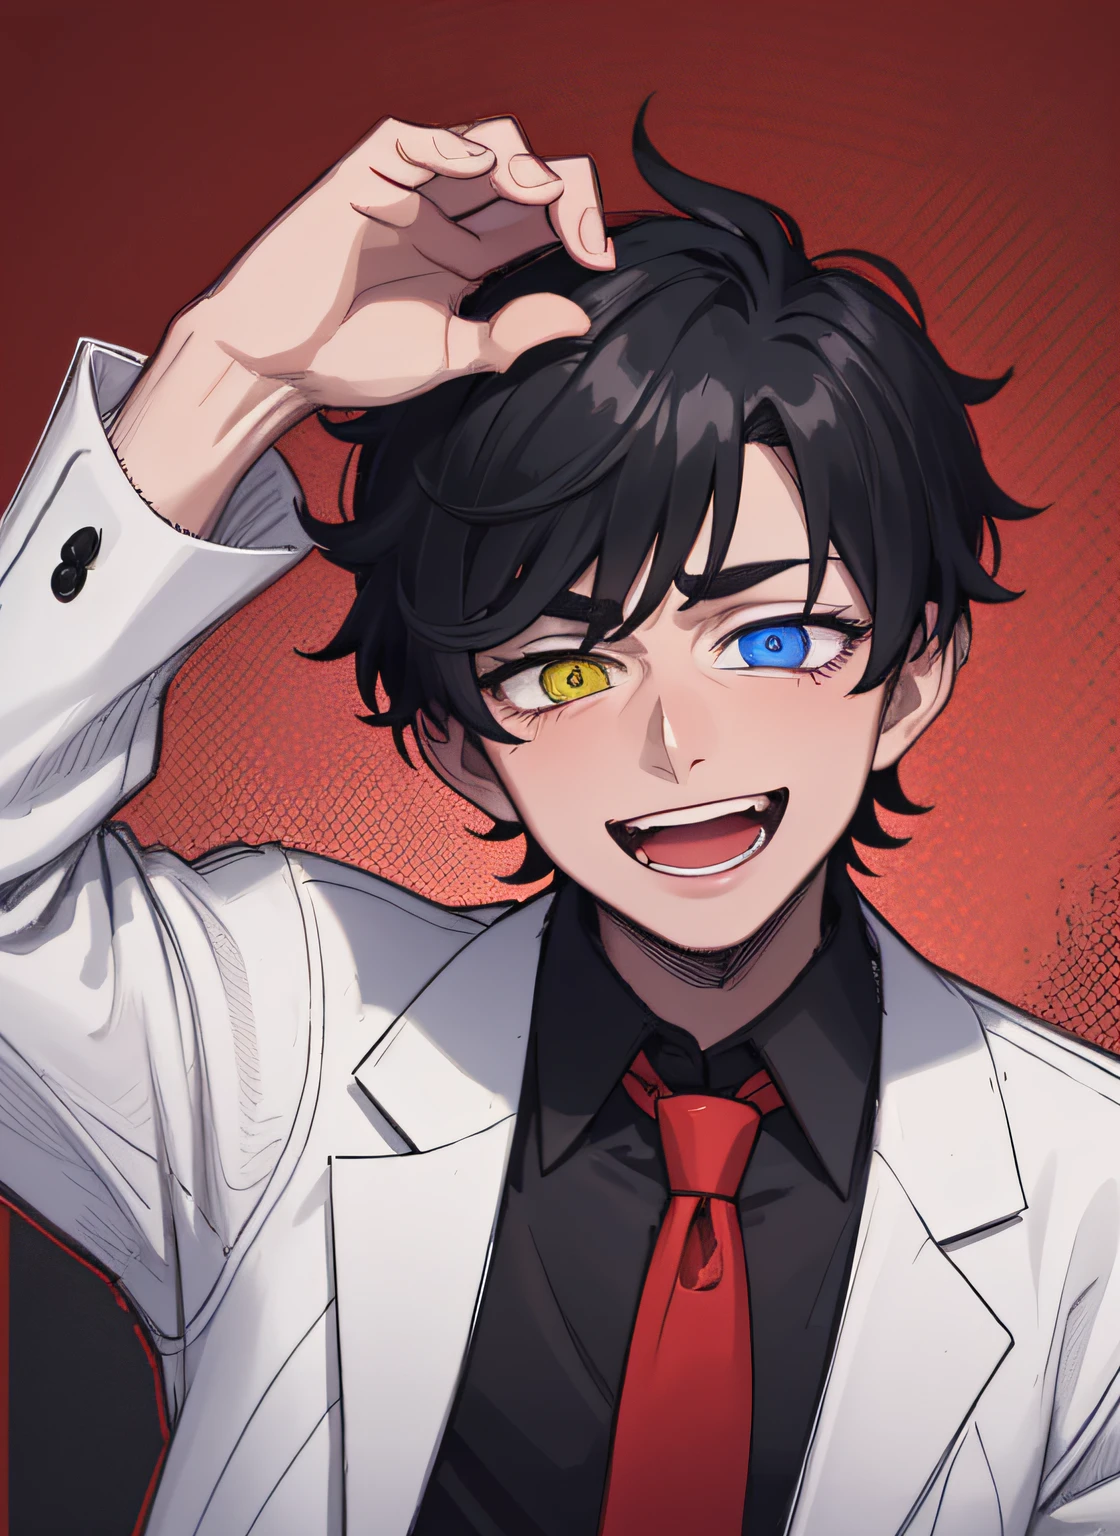 short black hair boy wearing white chemise and earthy black jacket, wearing red tie, heterochromia, laugh faace, white background